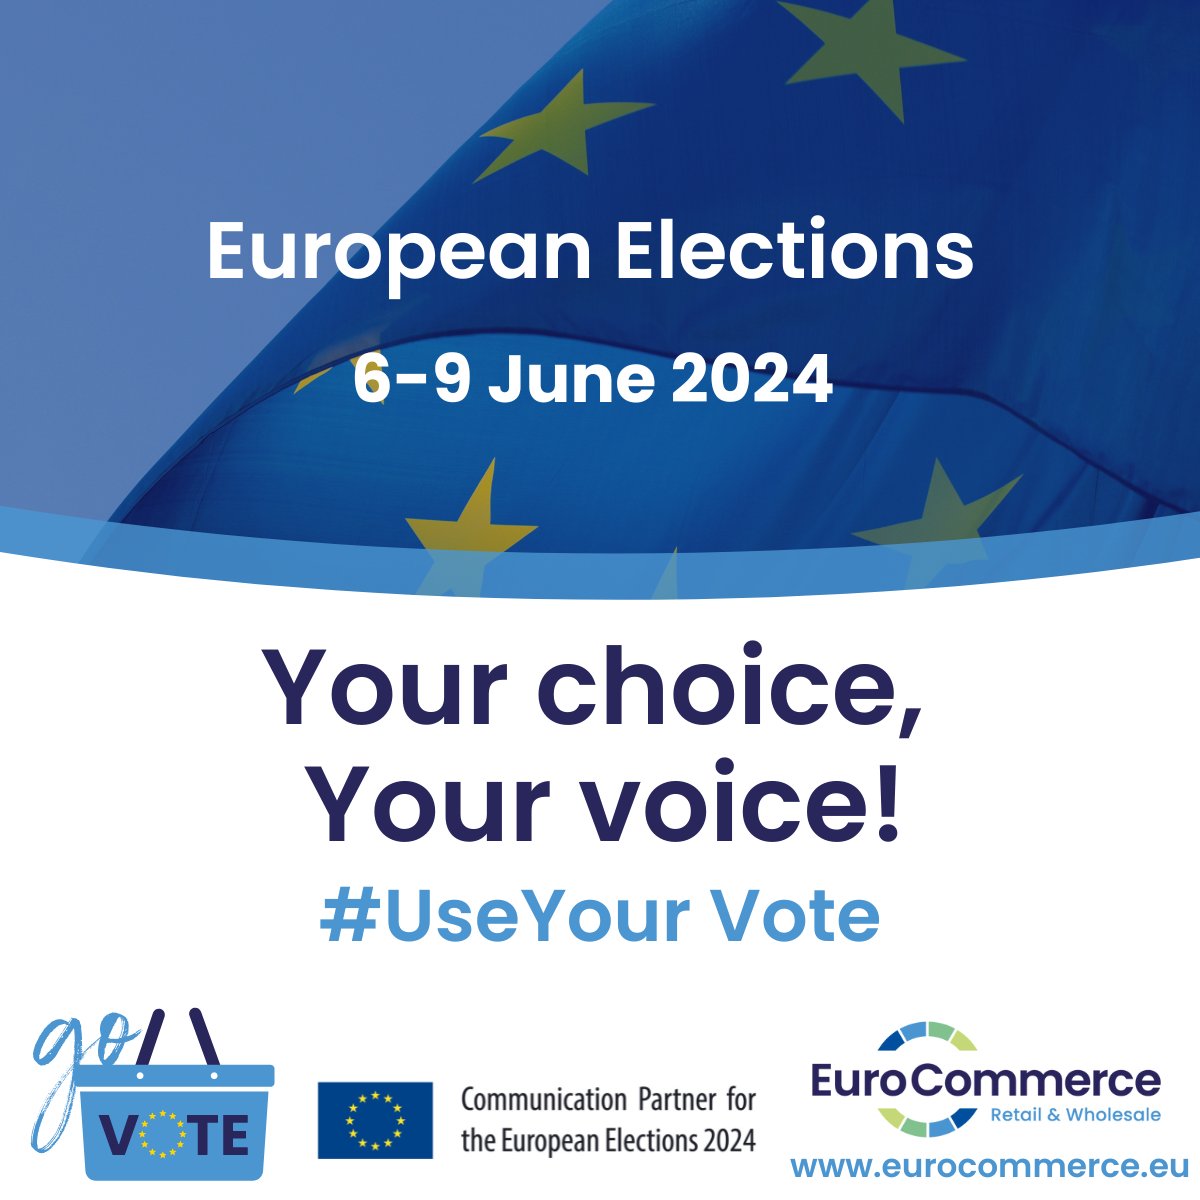 🚀 Only one month to go until the European elections! 🗳️ Attention #retailers and #wholesalers: #UseYourVote from 6 to 9 June to shape the future of our continent. Every vote counts! Spread the word and visit eurocommerce.eu/go-vote/ to find out more. #EuropeanElections #govote